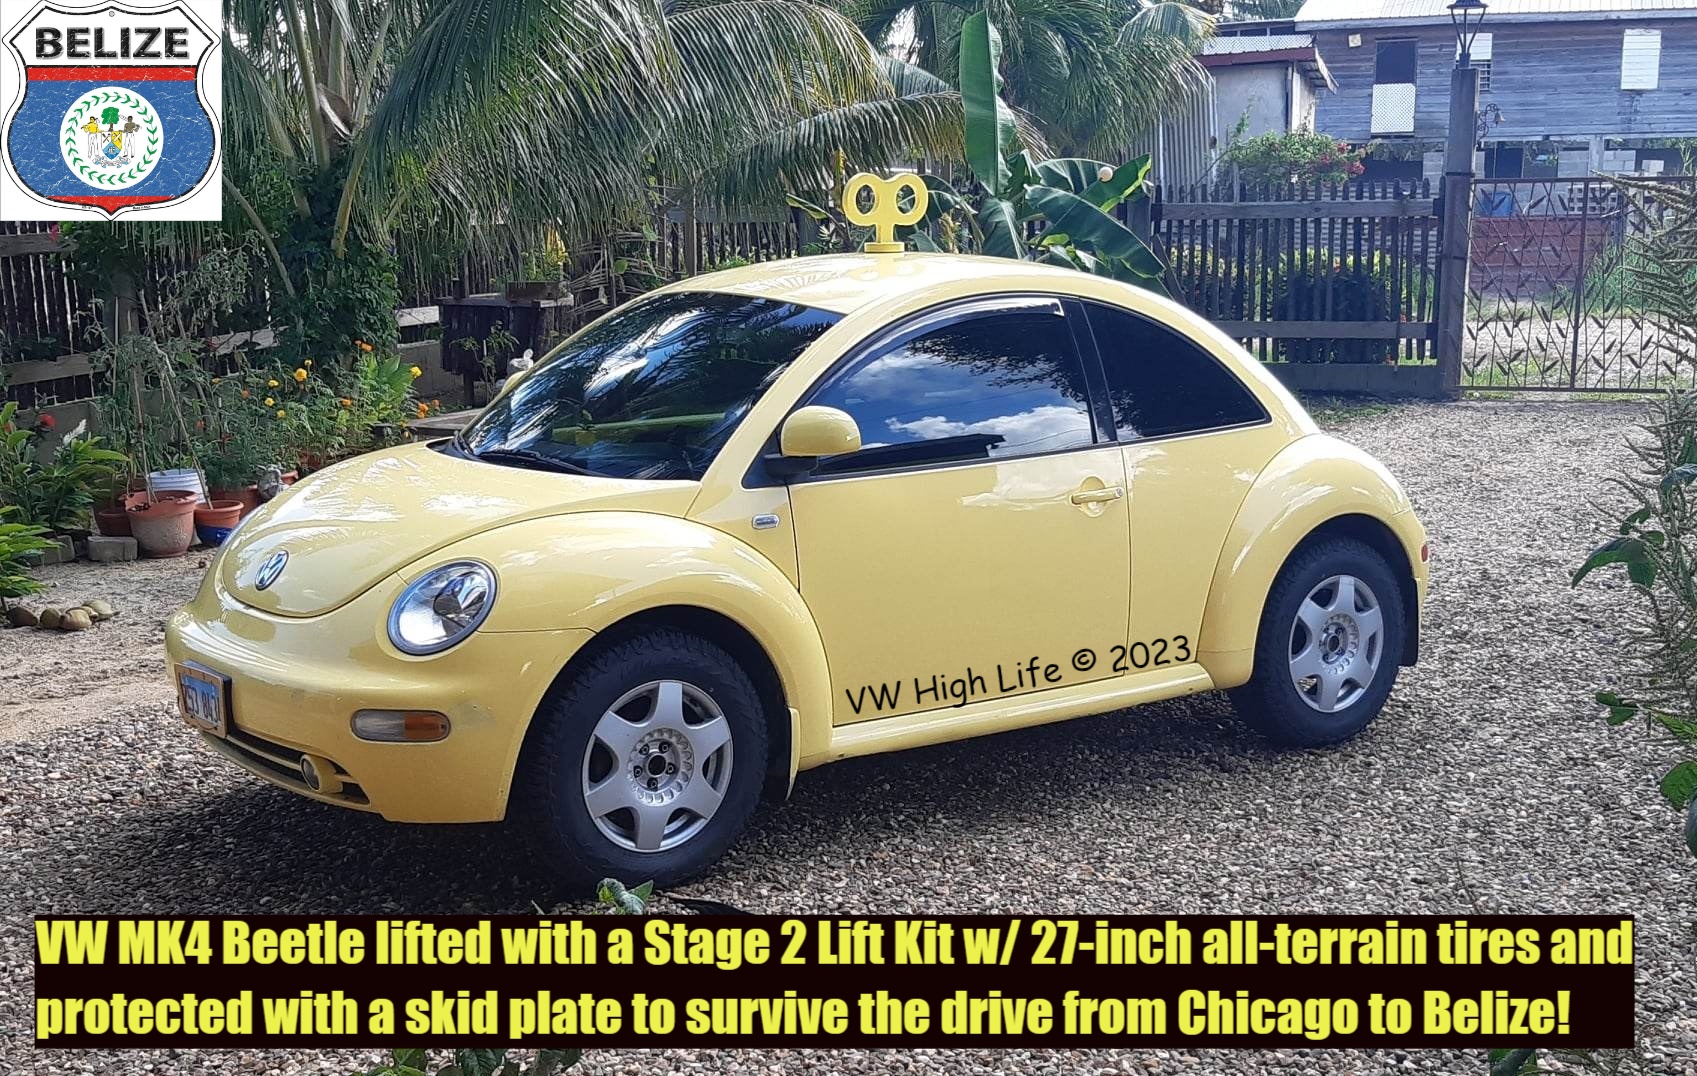 Congrats to Roy on driving his lifted Beetle with all-terrain tire from Chicago to Belize!